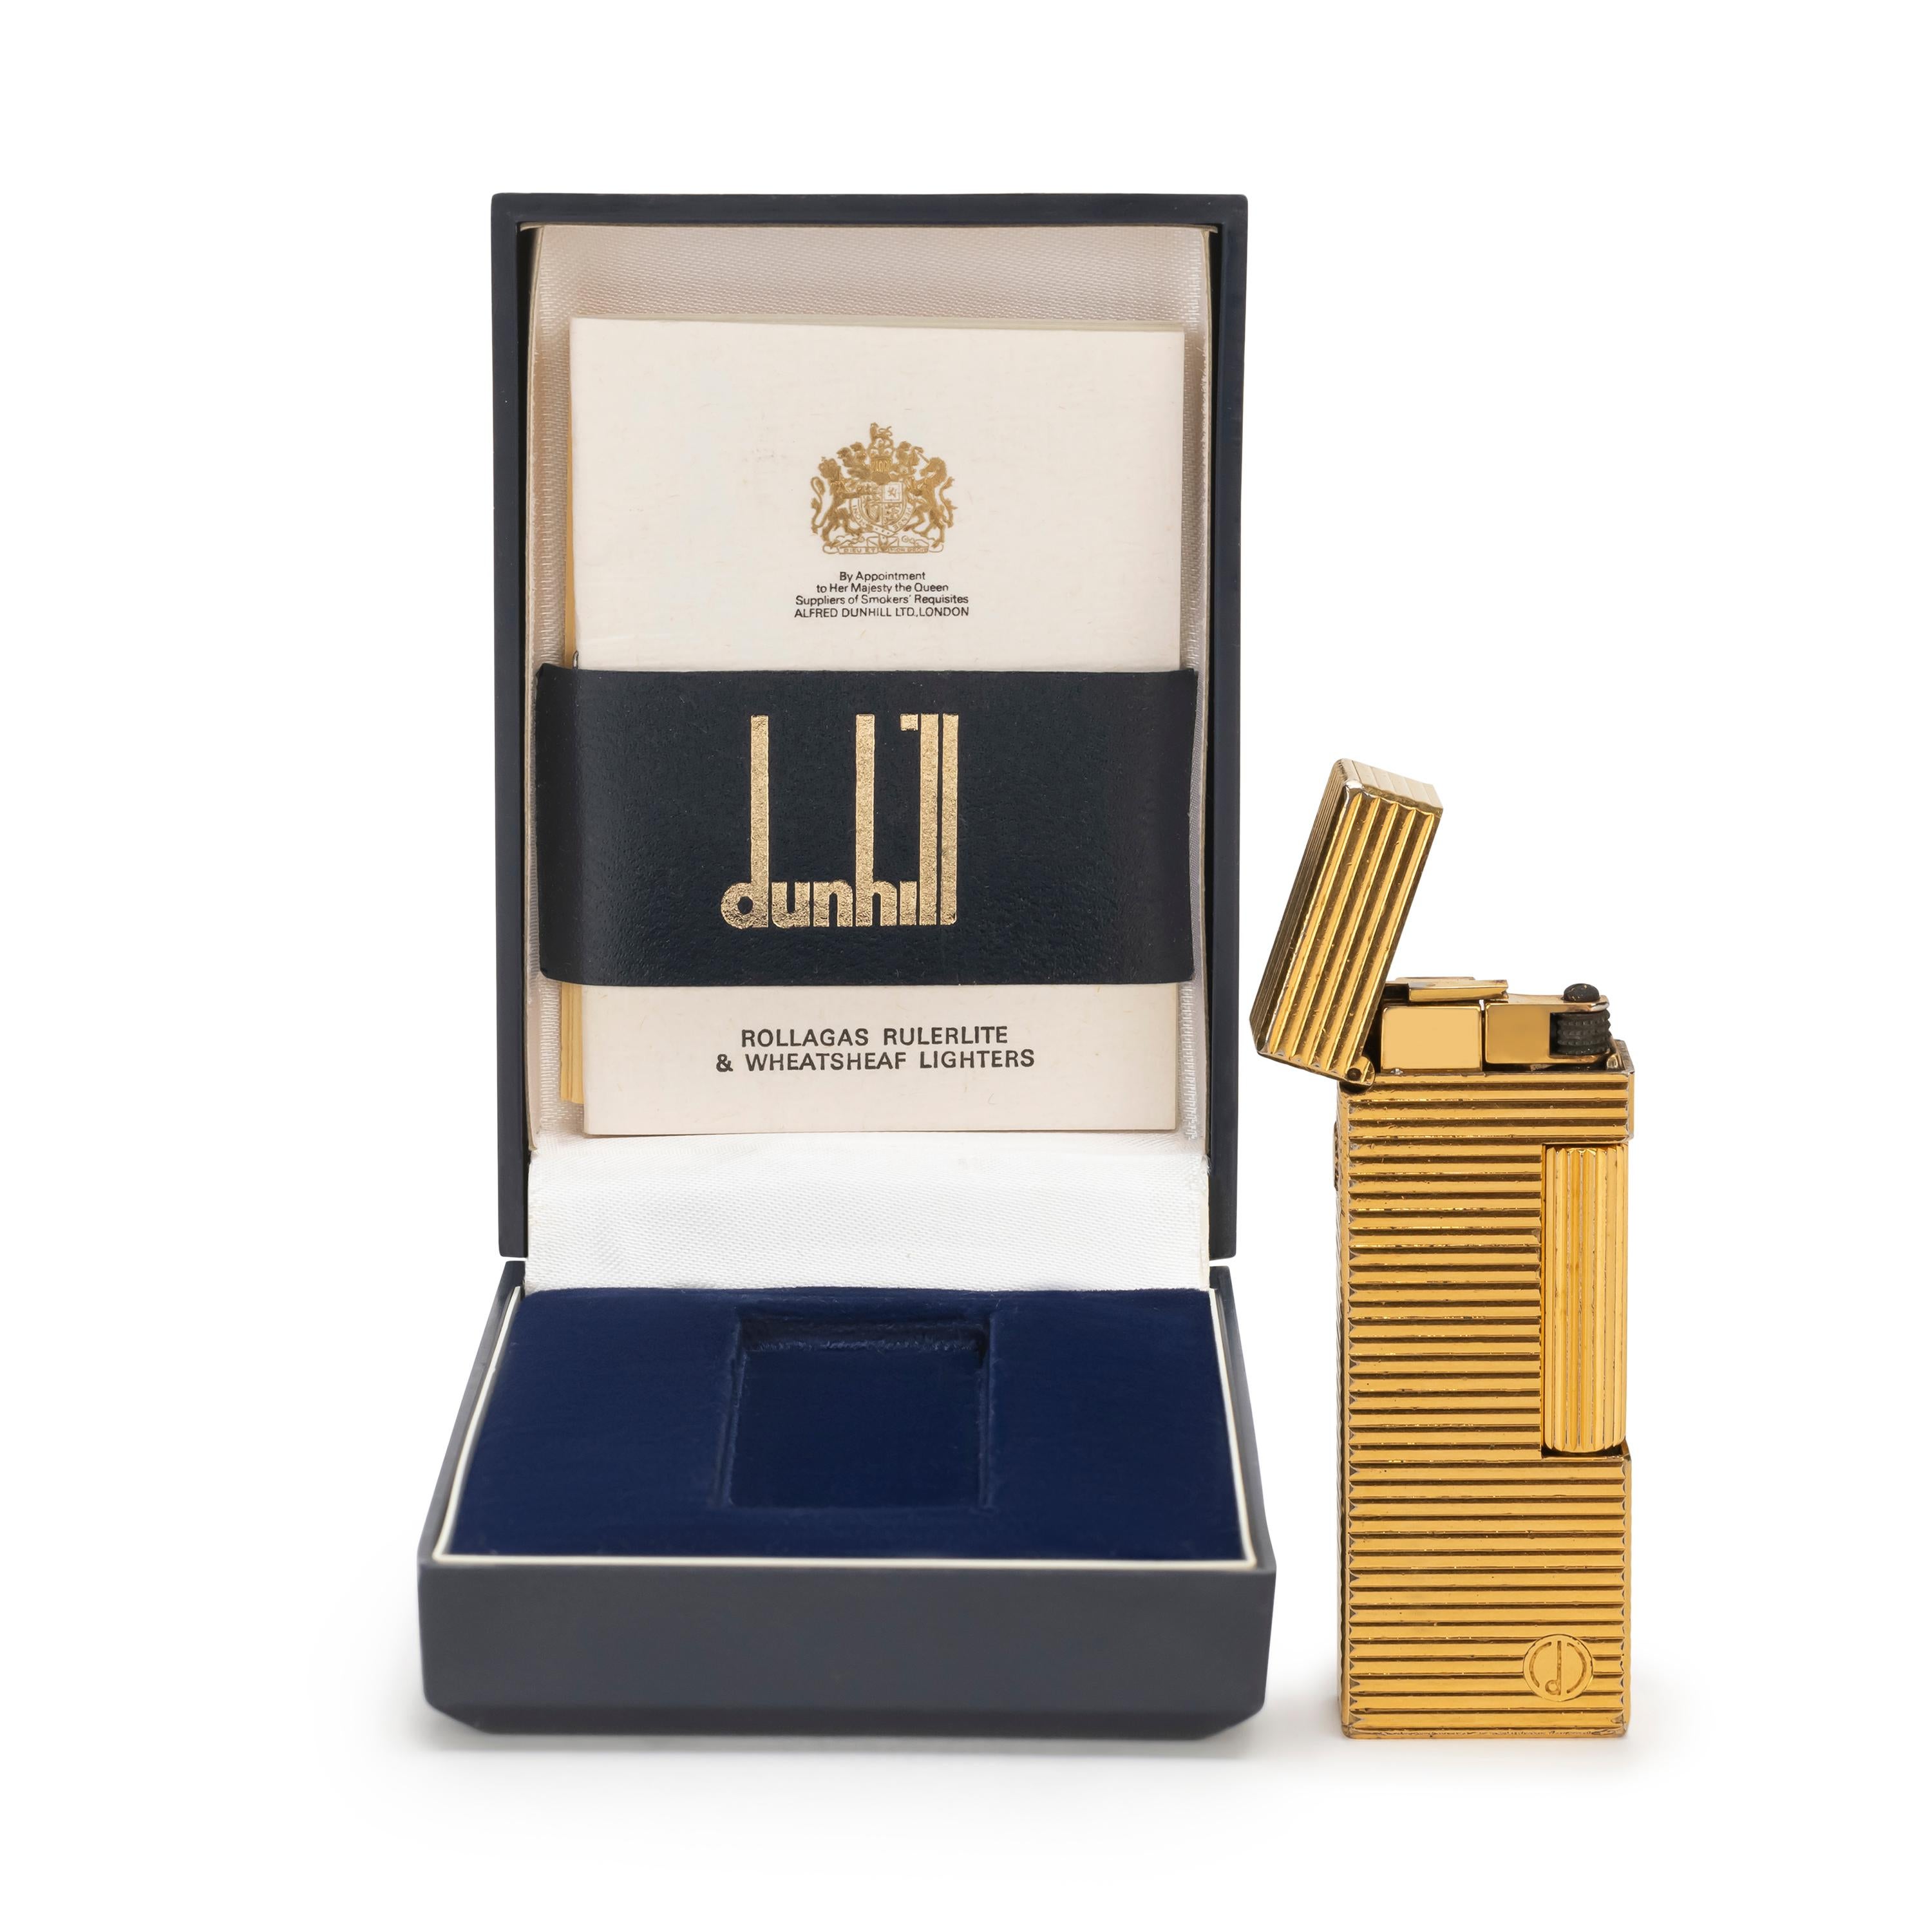 Rare, Iconic, chic and Elegant Dunhill Gold Plated Swiss Made Lighter.
Seen in the “James Bond” films. 
In mint condition. 
Works perfectly. 
Iconic and beautifully engineered piece in rare condition.
In original dunhill Blue box which is as good as